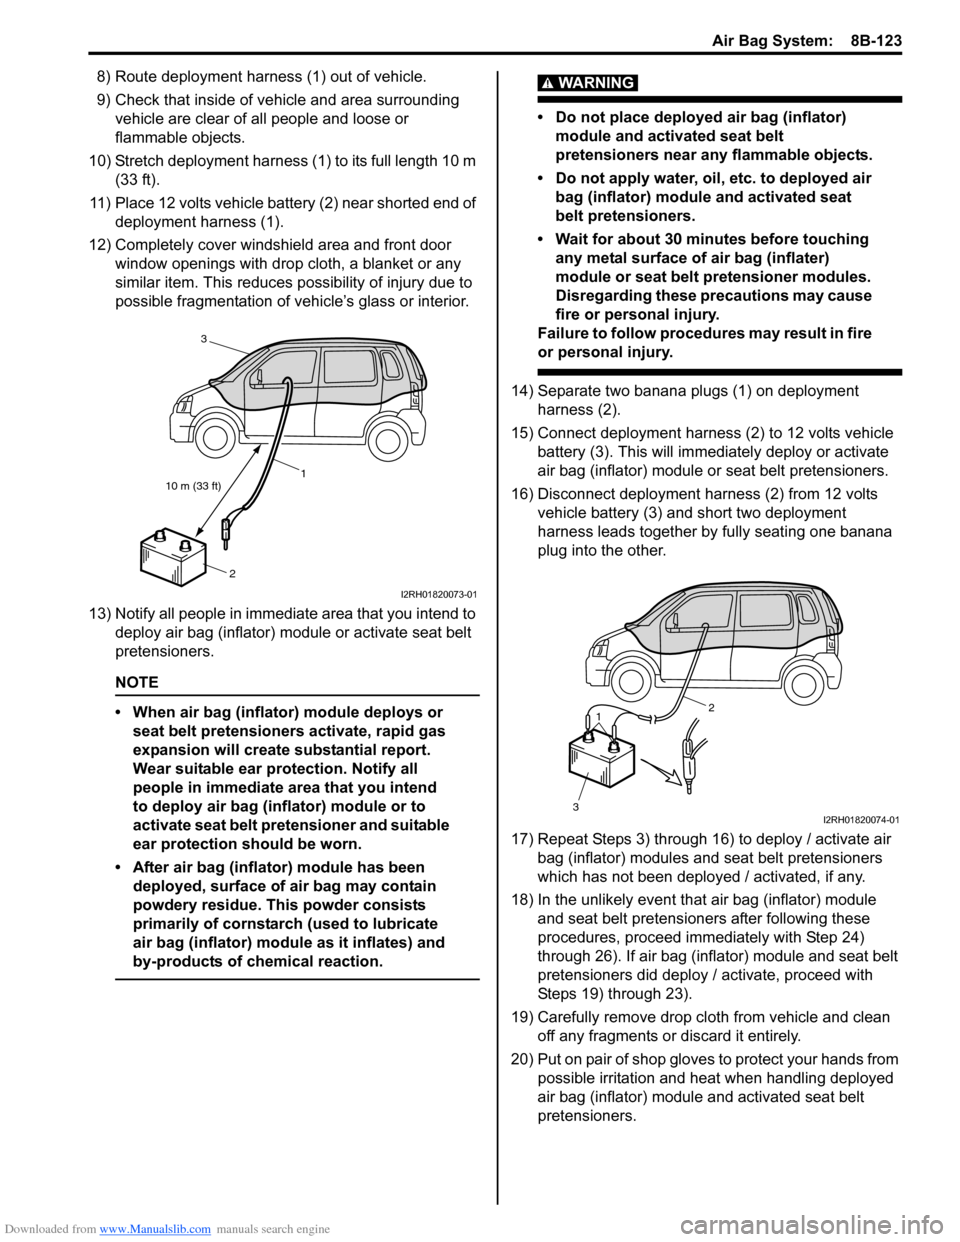 SUZUKI SWIFT 2005 2.G Service Workshop Manual Downloaded from www.Manualslib.com manuals search engine Air Bag System:  8B-123
8) Route deployment harness (1) out of vehicle.
9) Check that inside of vehicle and area surrounding vehicle are clear 